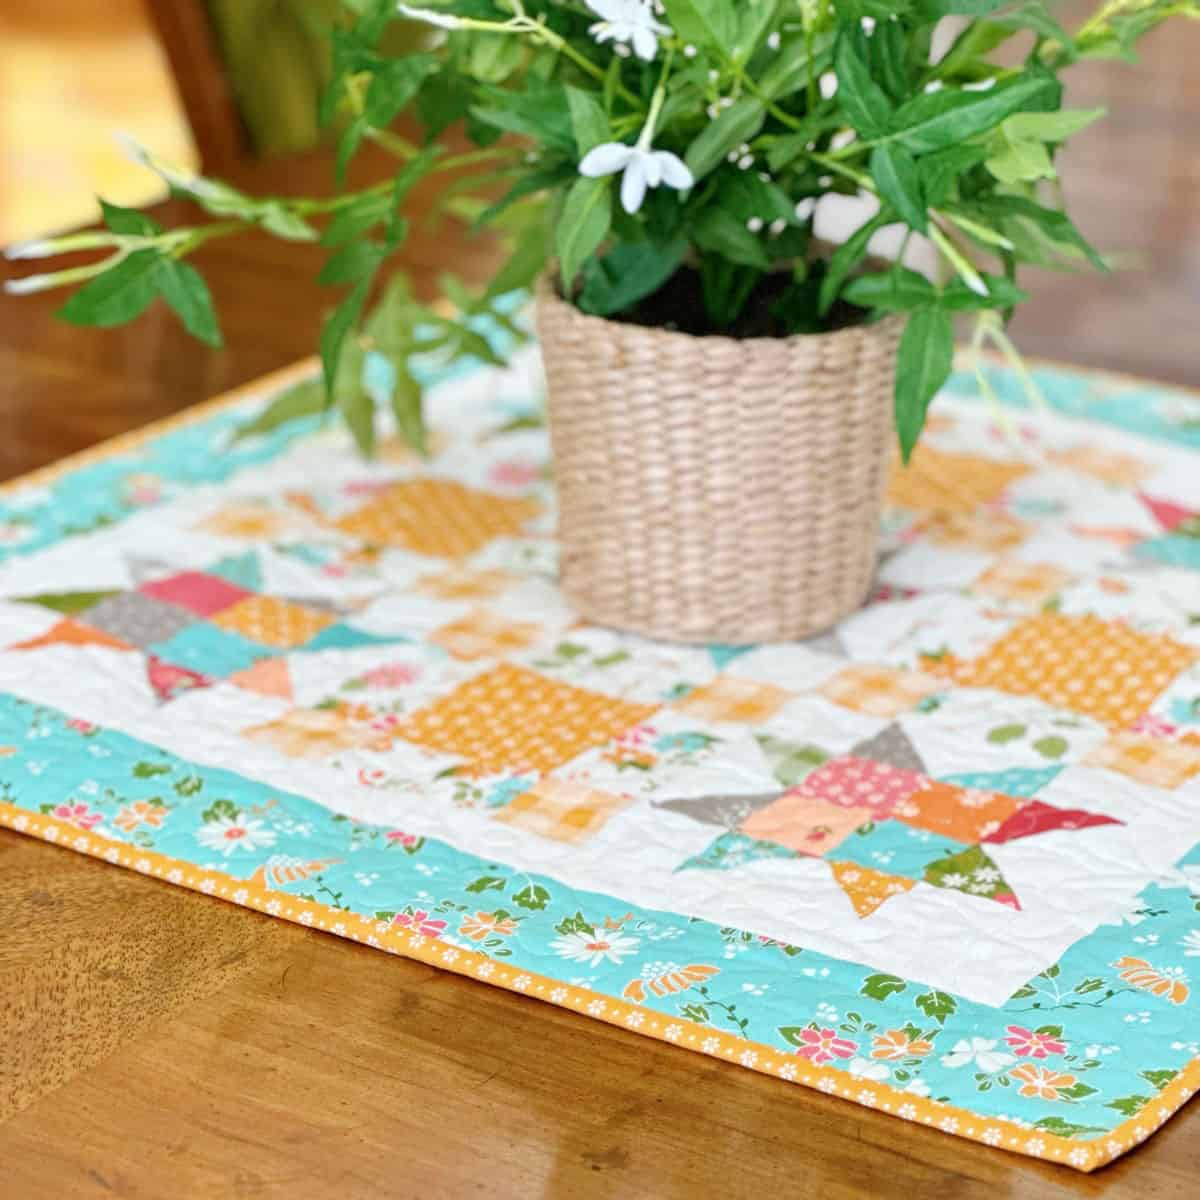 Quilted patchwork table topper with stars and potted plant